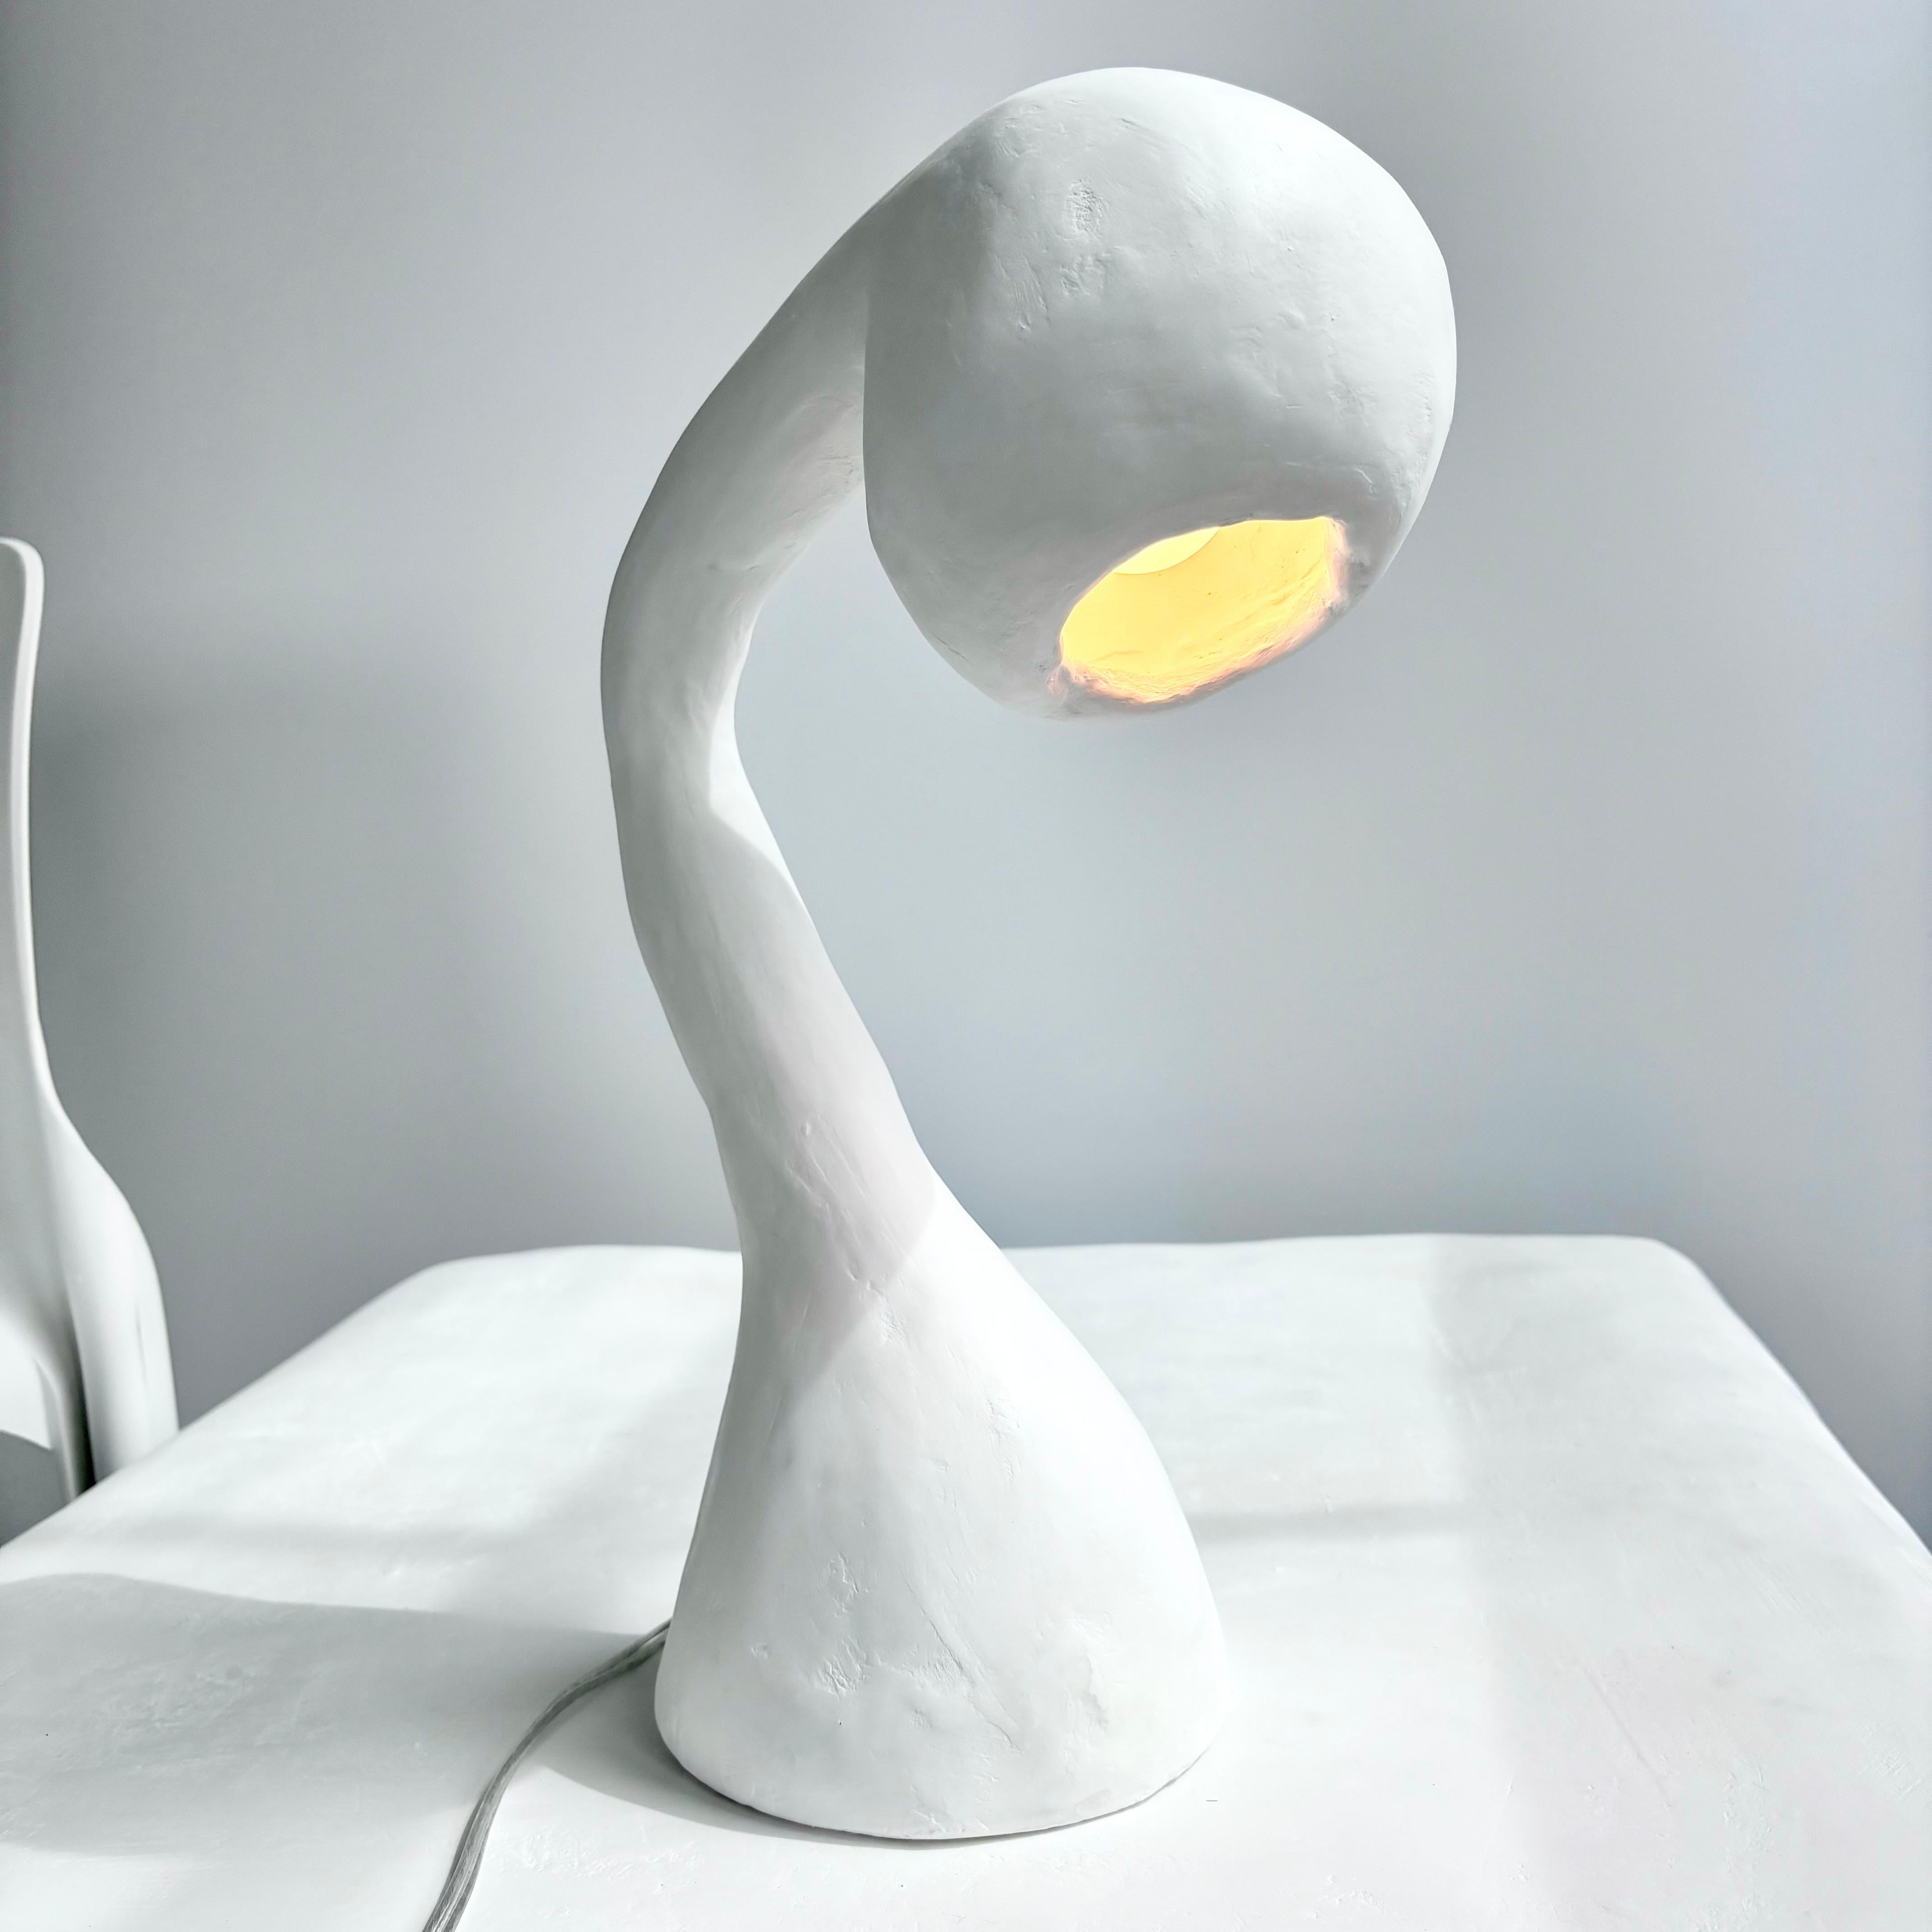 Hand-Carved Biomorphic Line by Studio Chora, Task Table Lamp, White Lime Plaster, In Stock